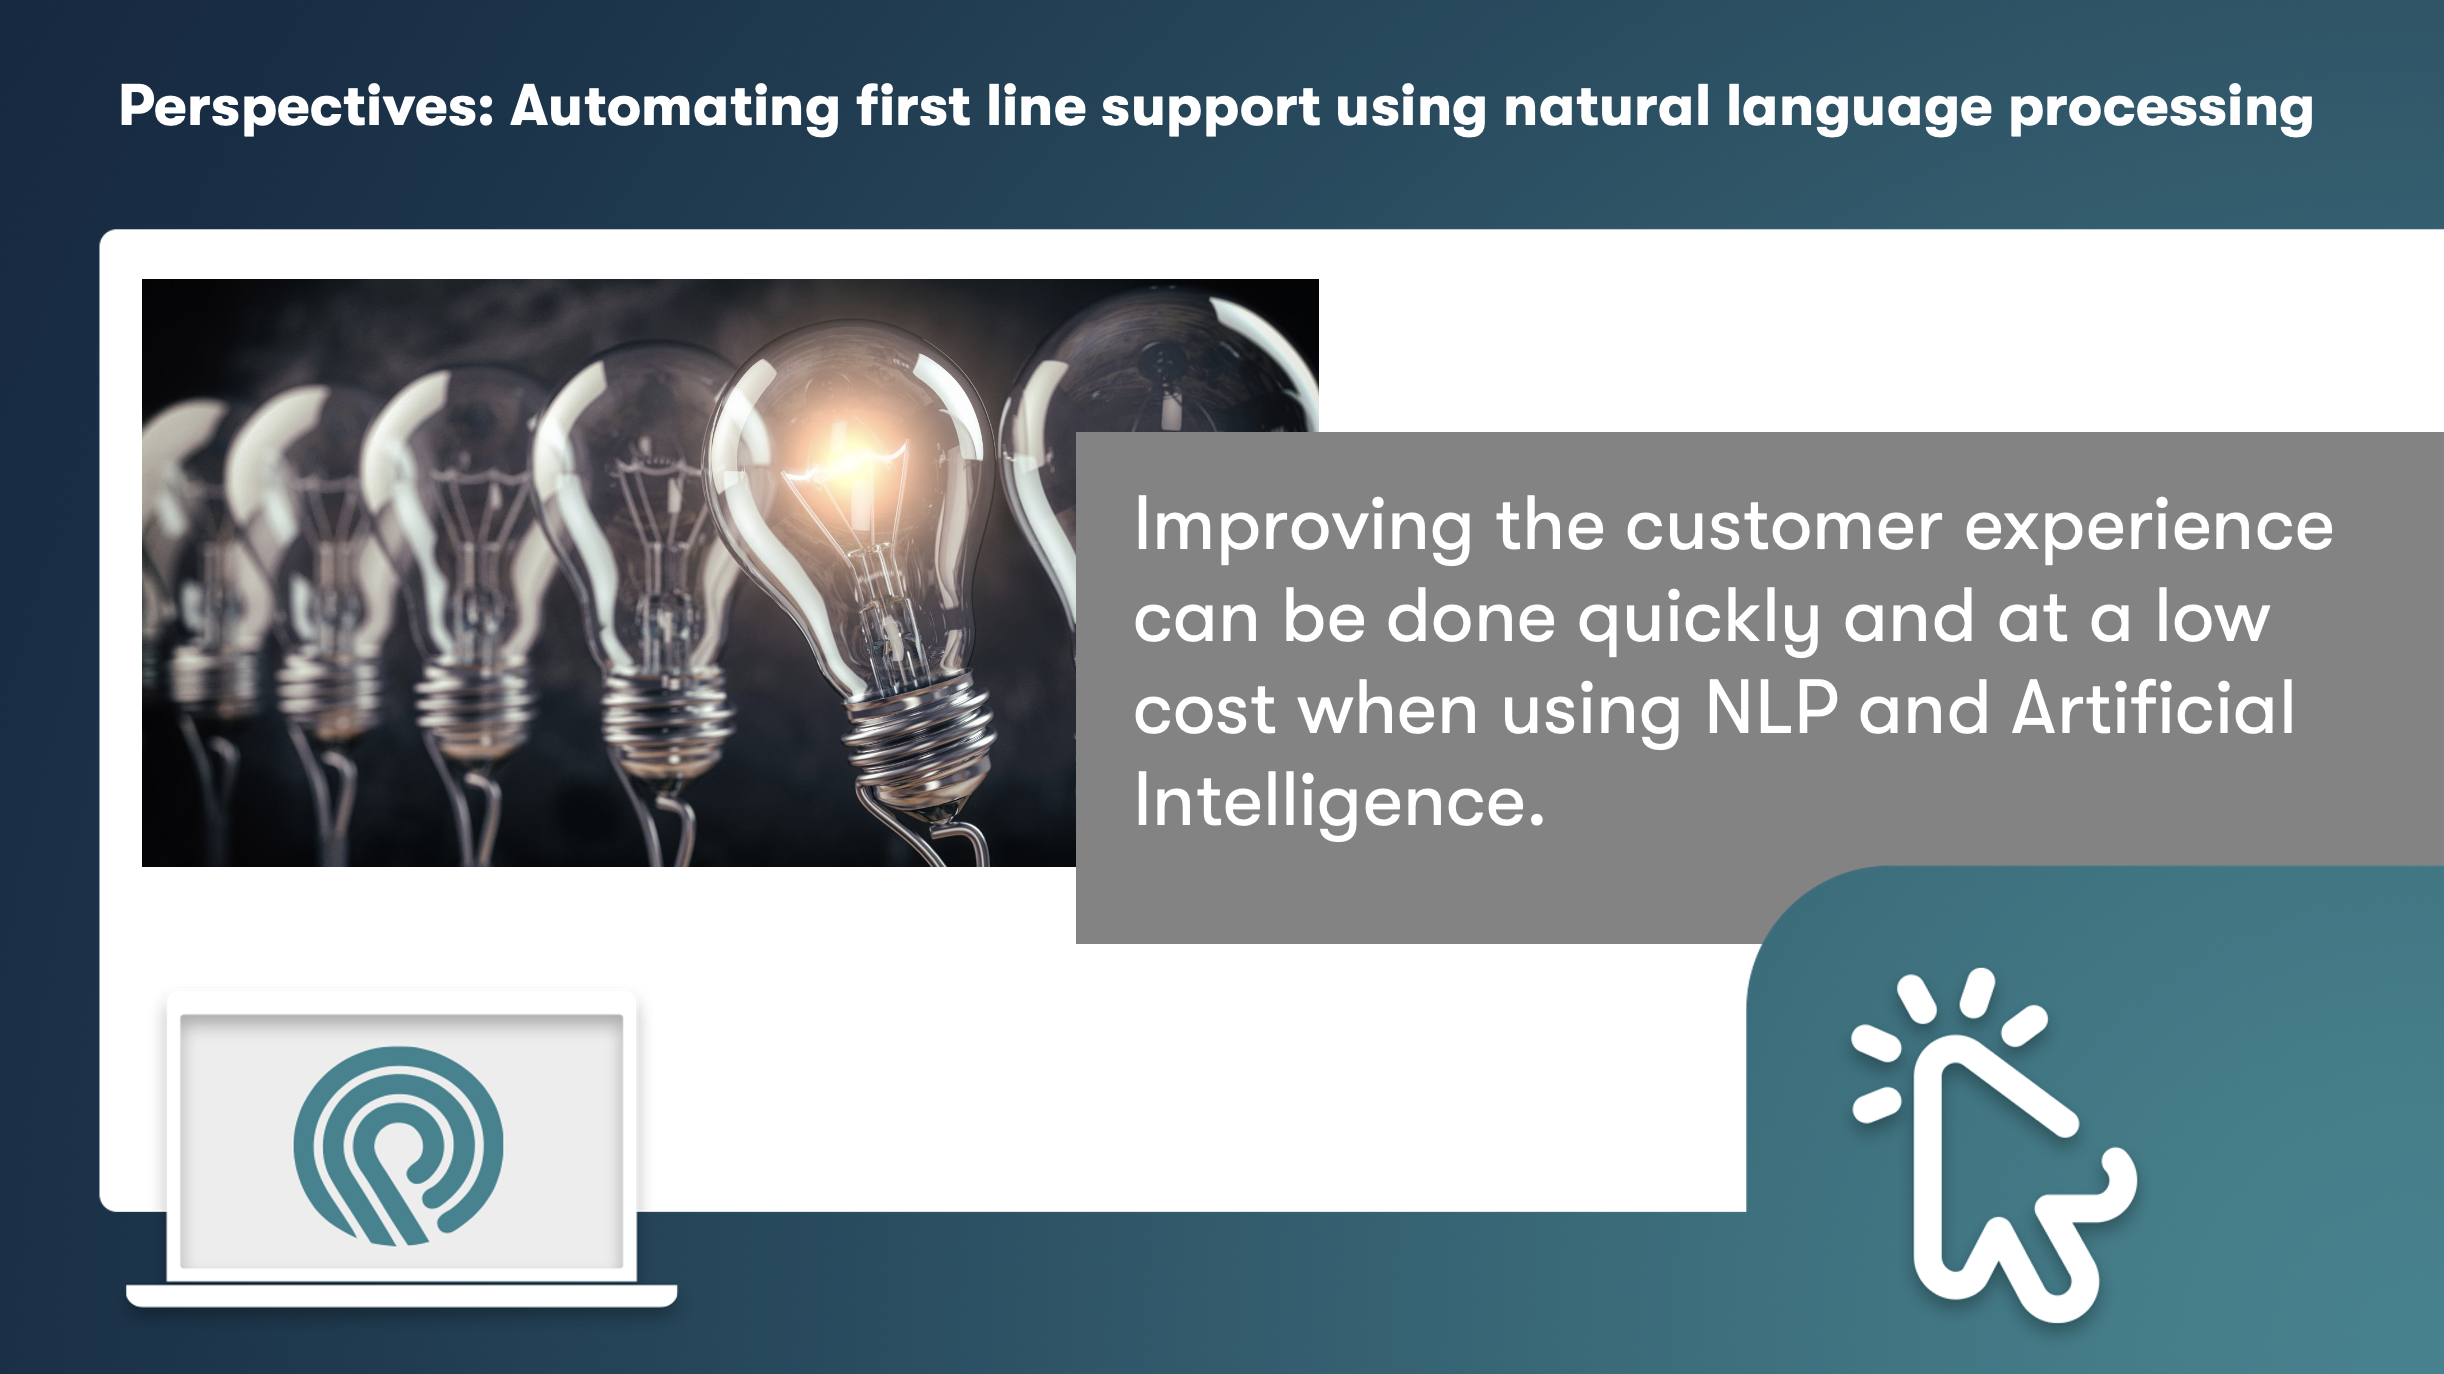 Perspectives: Automating first line support using natural language processing